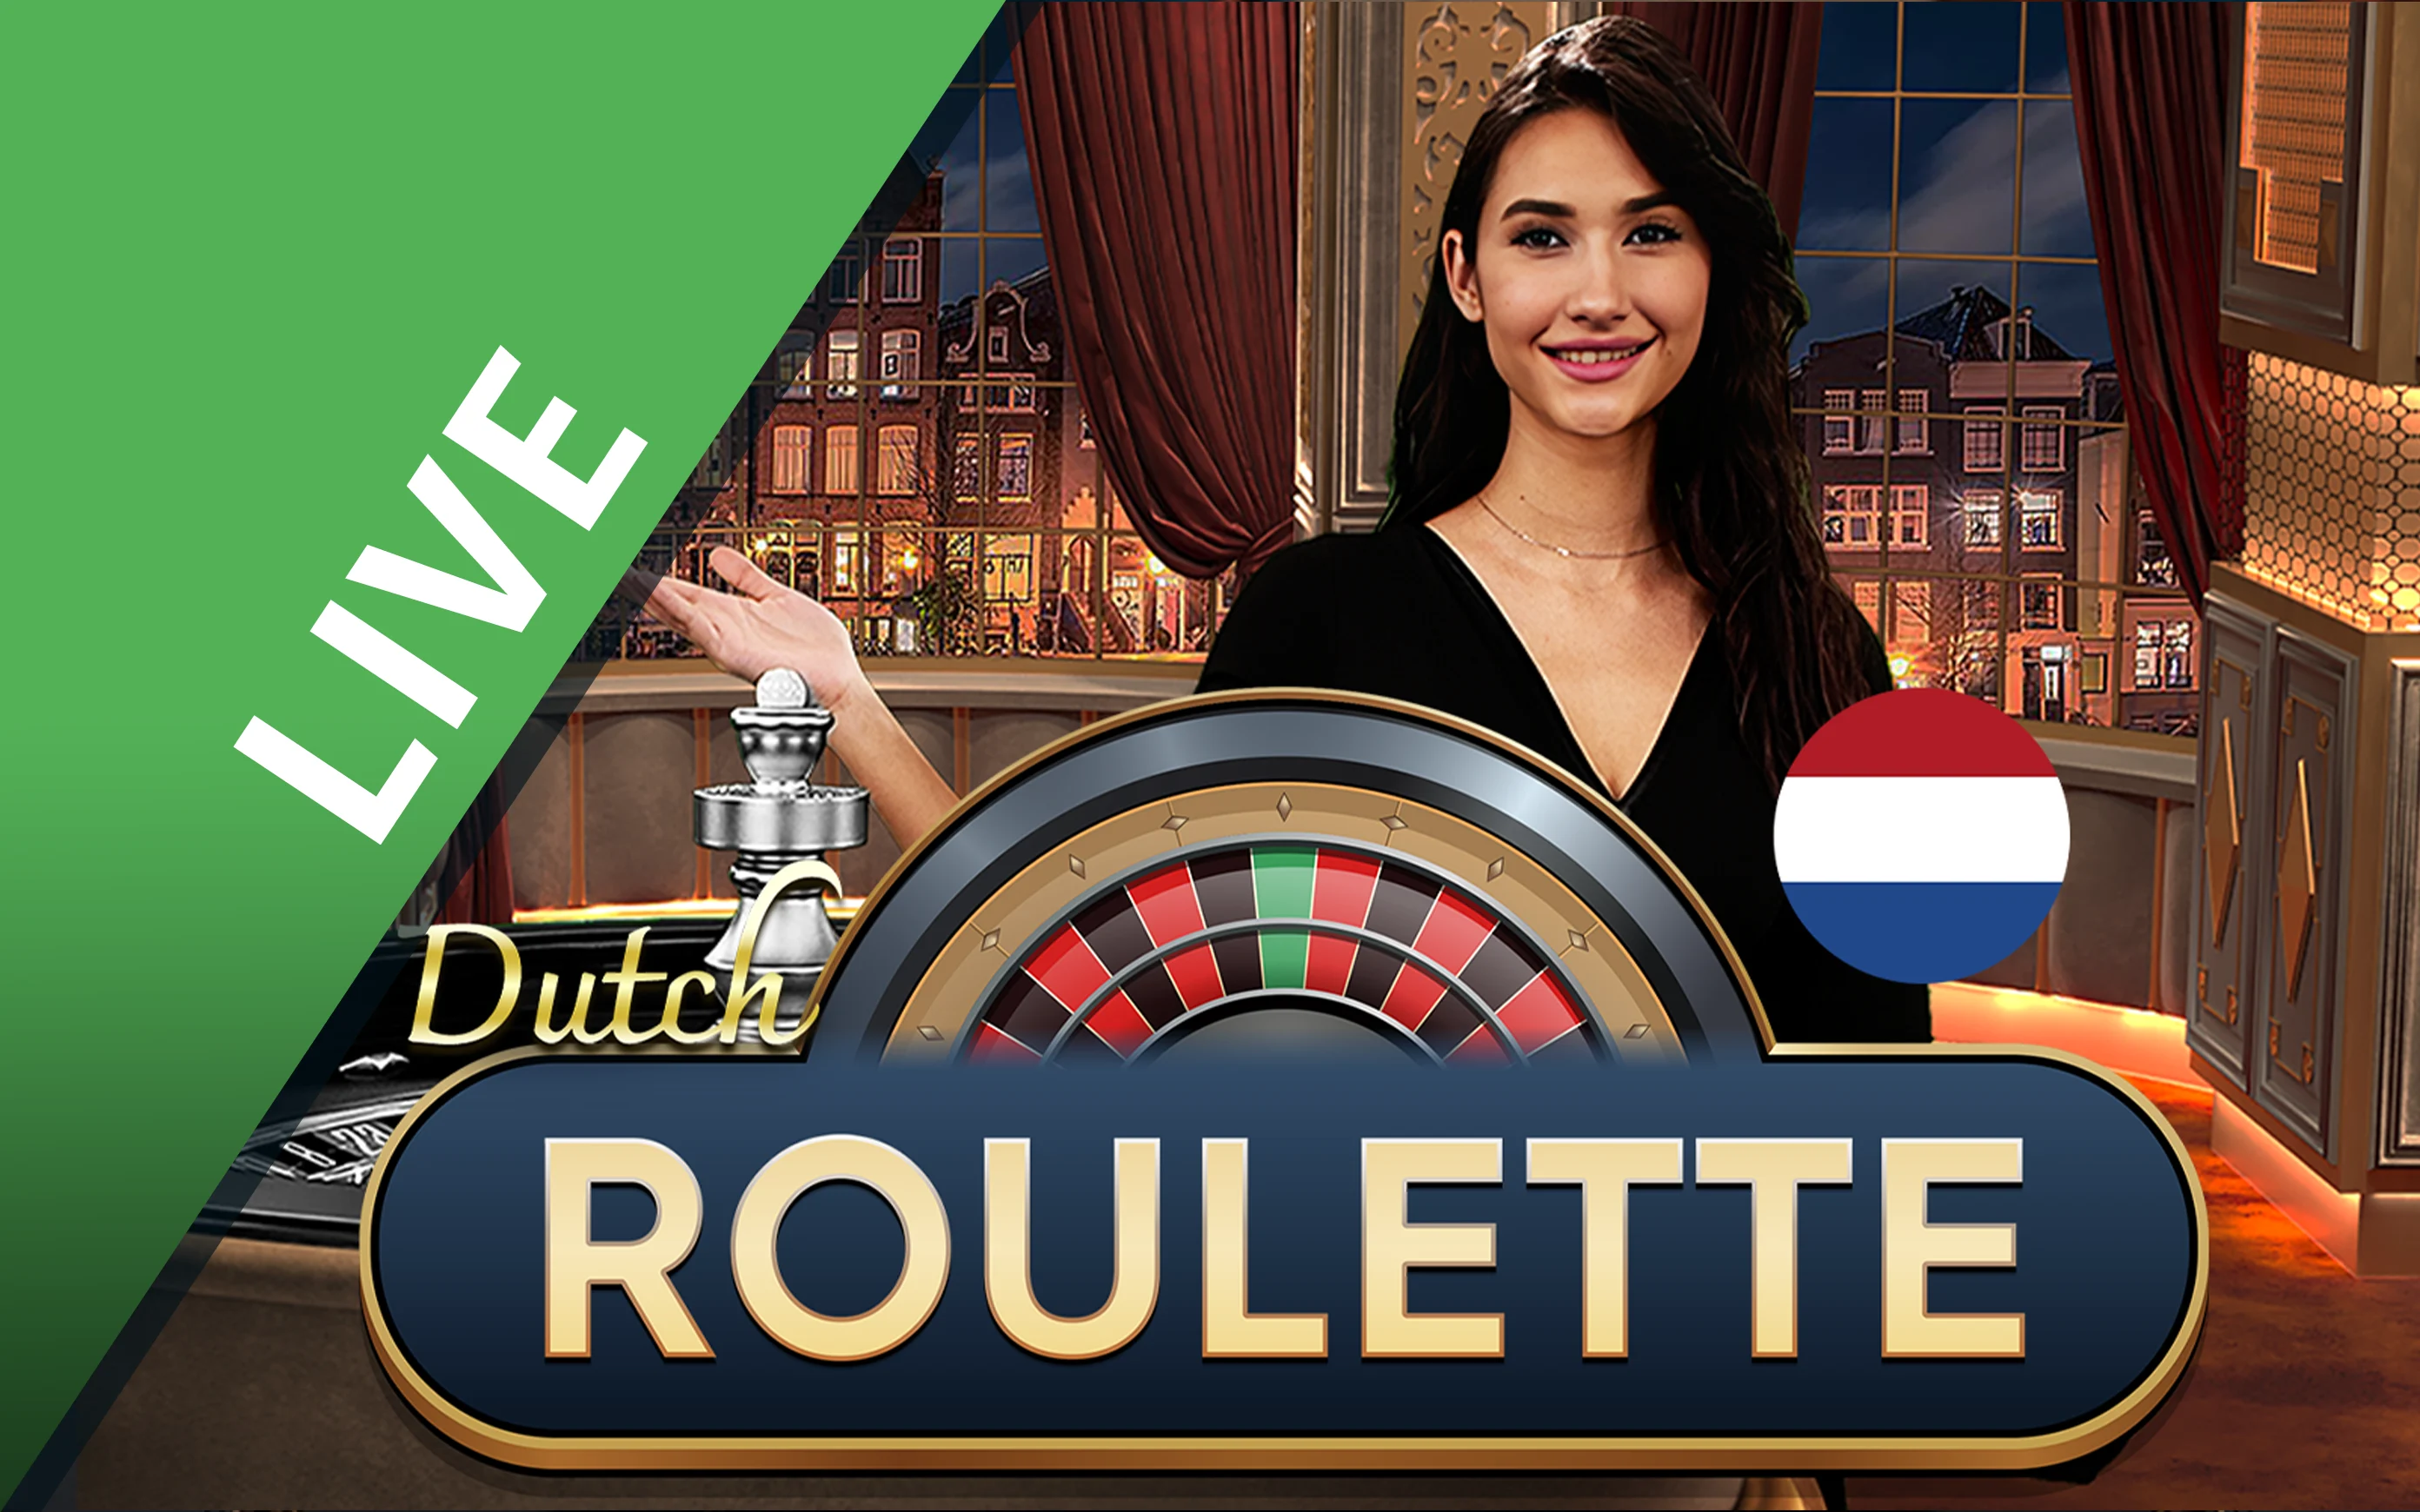 Play Dutch Roulette on Starcasino.be online casino